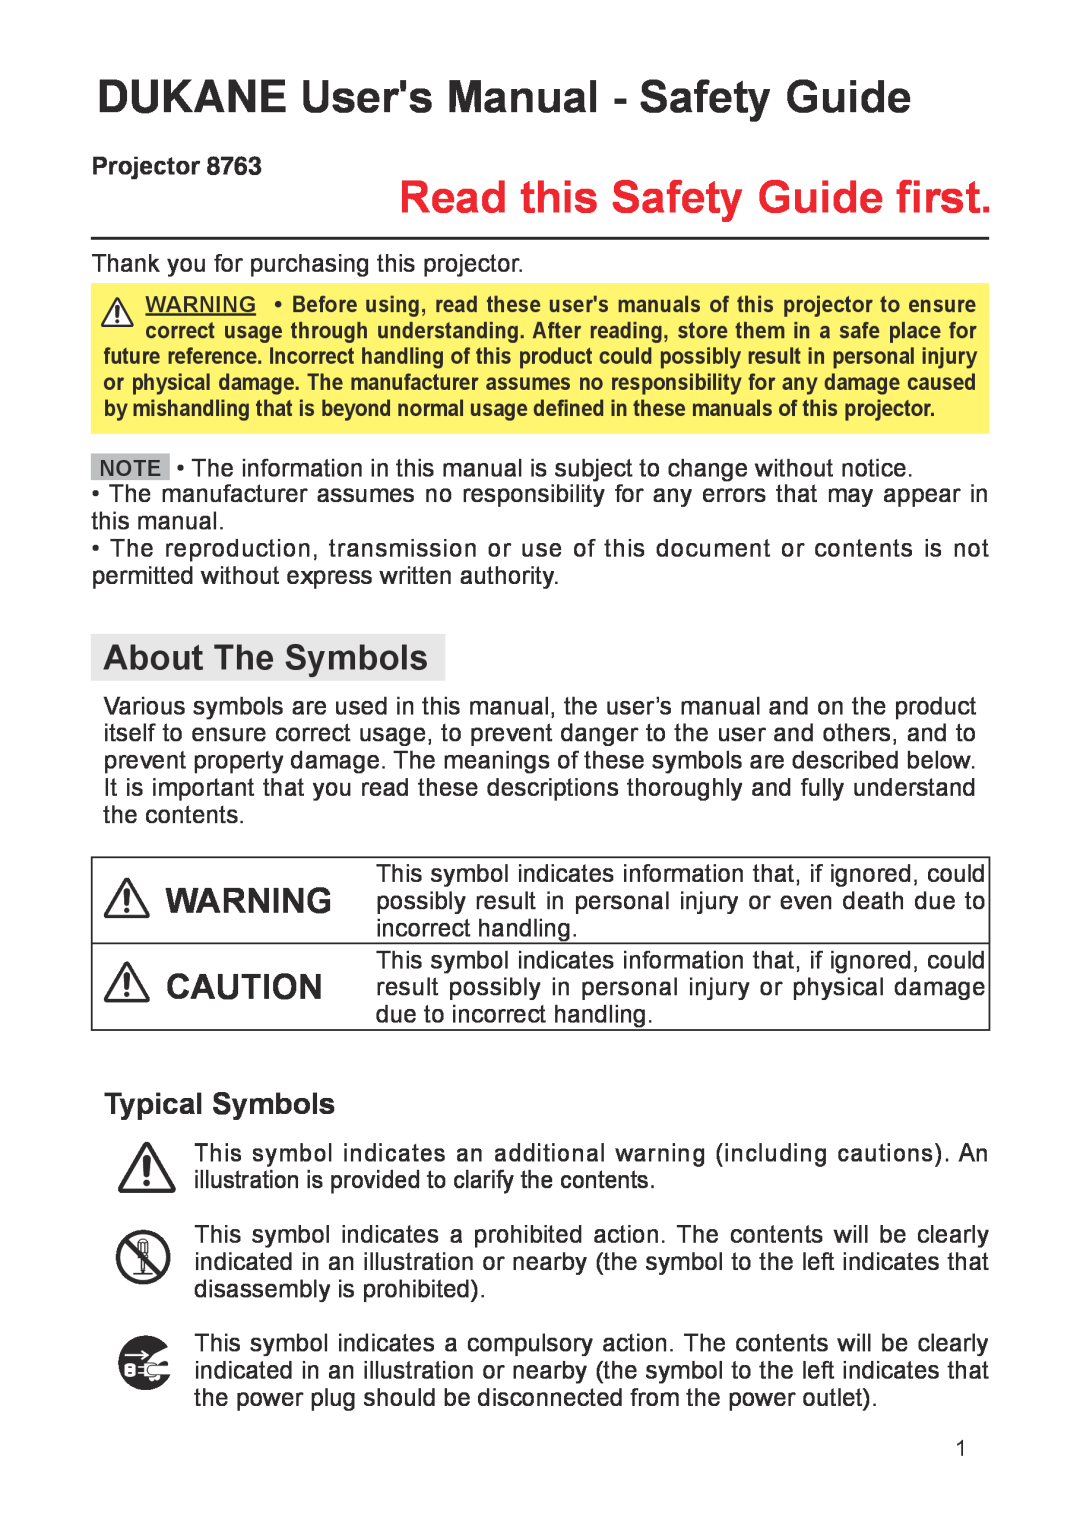 Dukane 8763 user manual DUKANE Users Manual - Safety Guide, Projector, Read this Safety Guide first, About The Symbols 